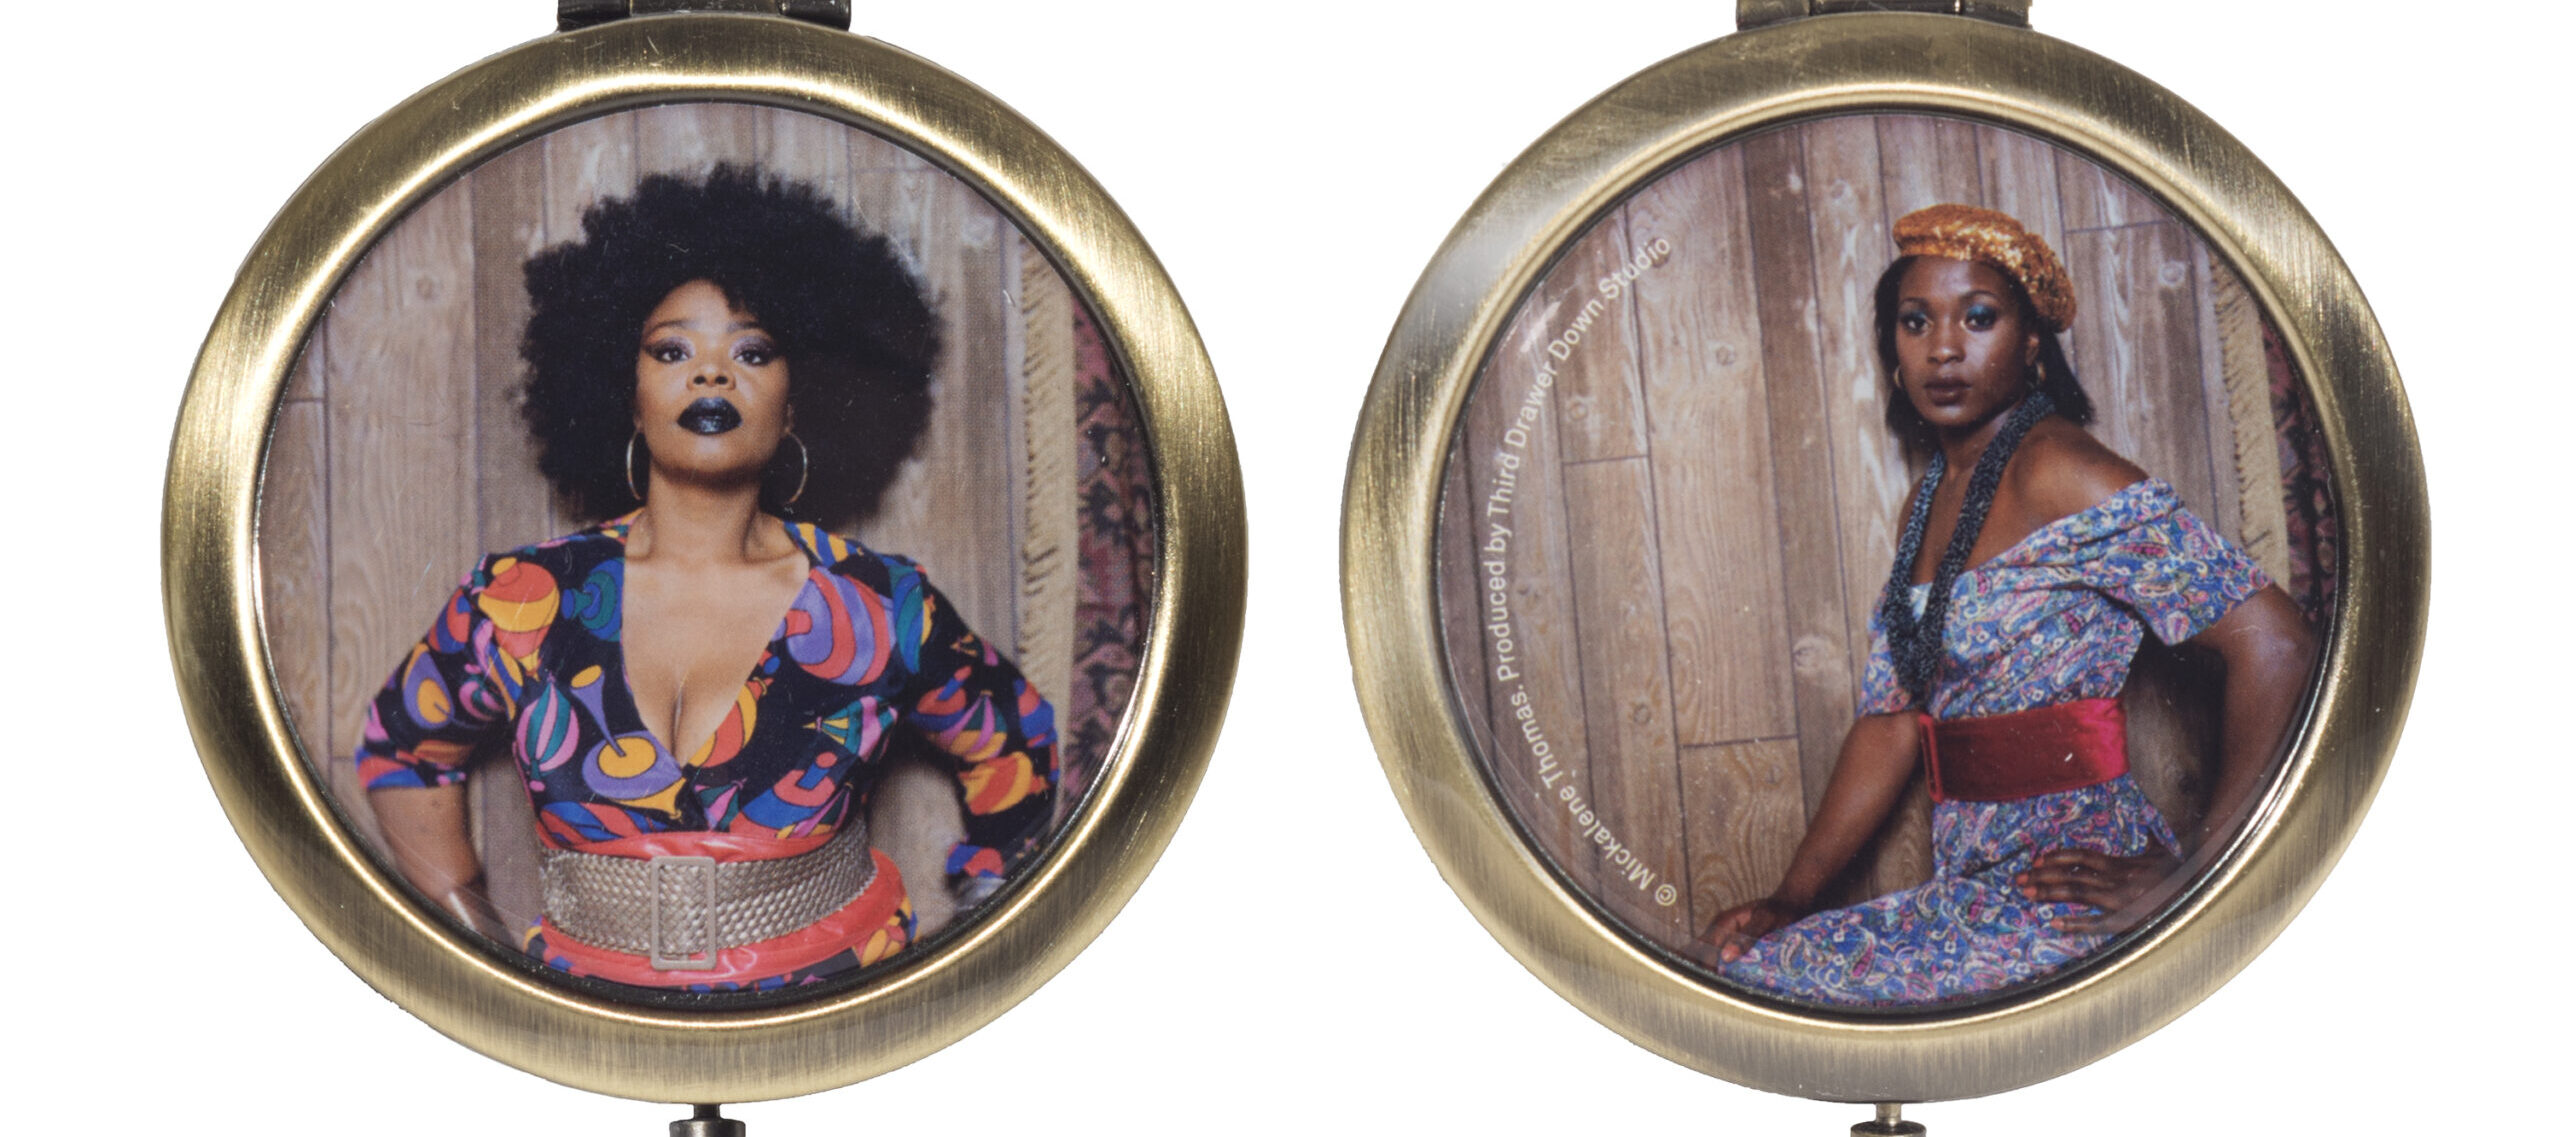 Two sides of a compact mirror, each featuring a photographic portrait of a black woman.